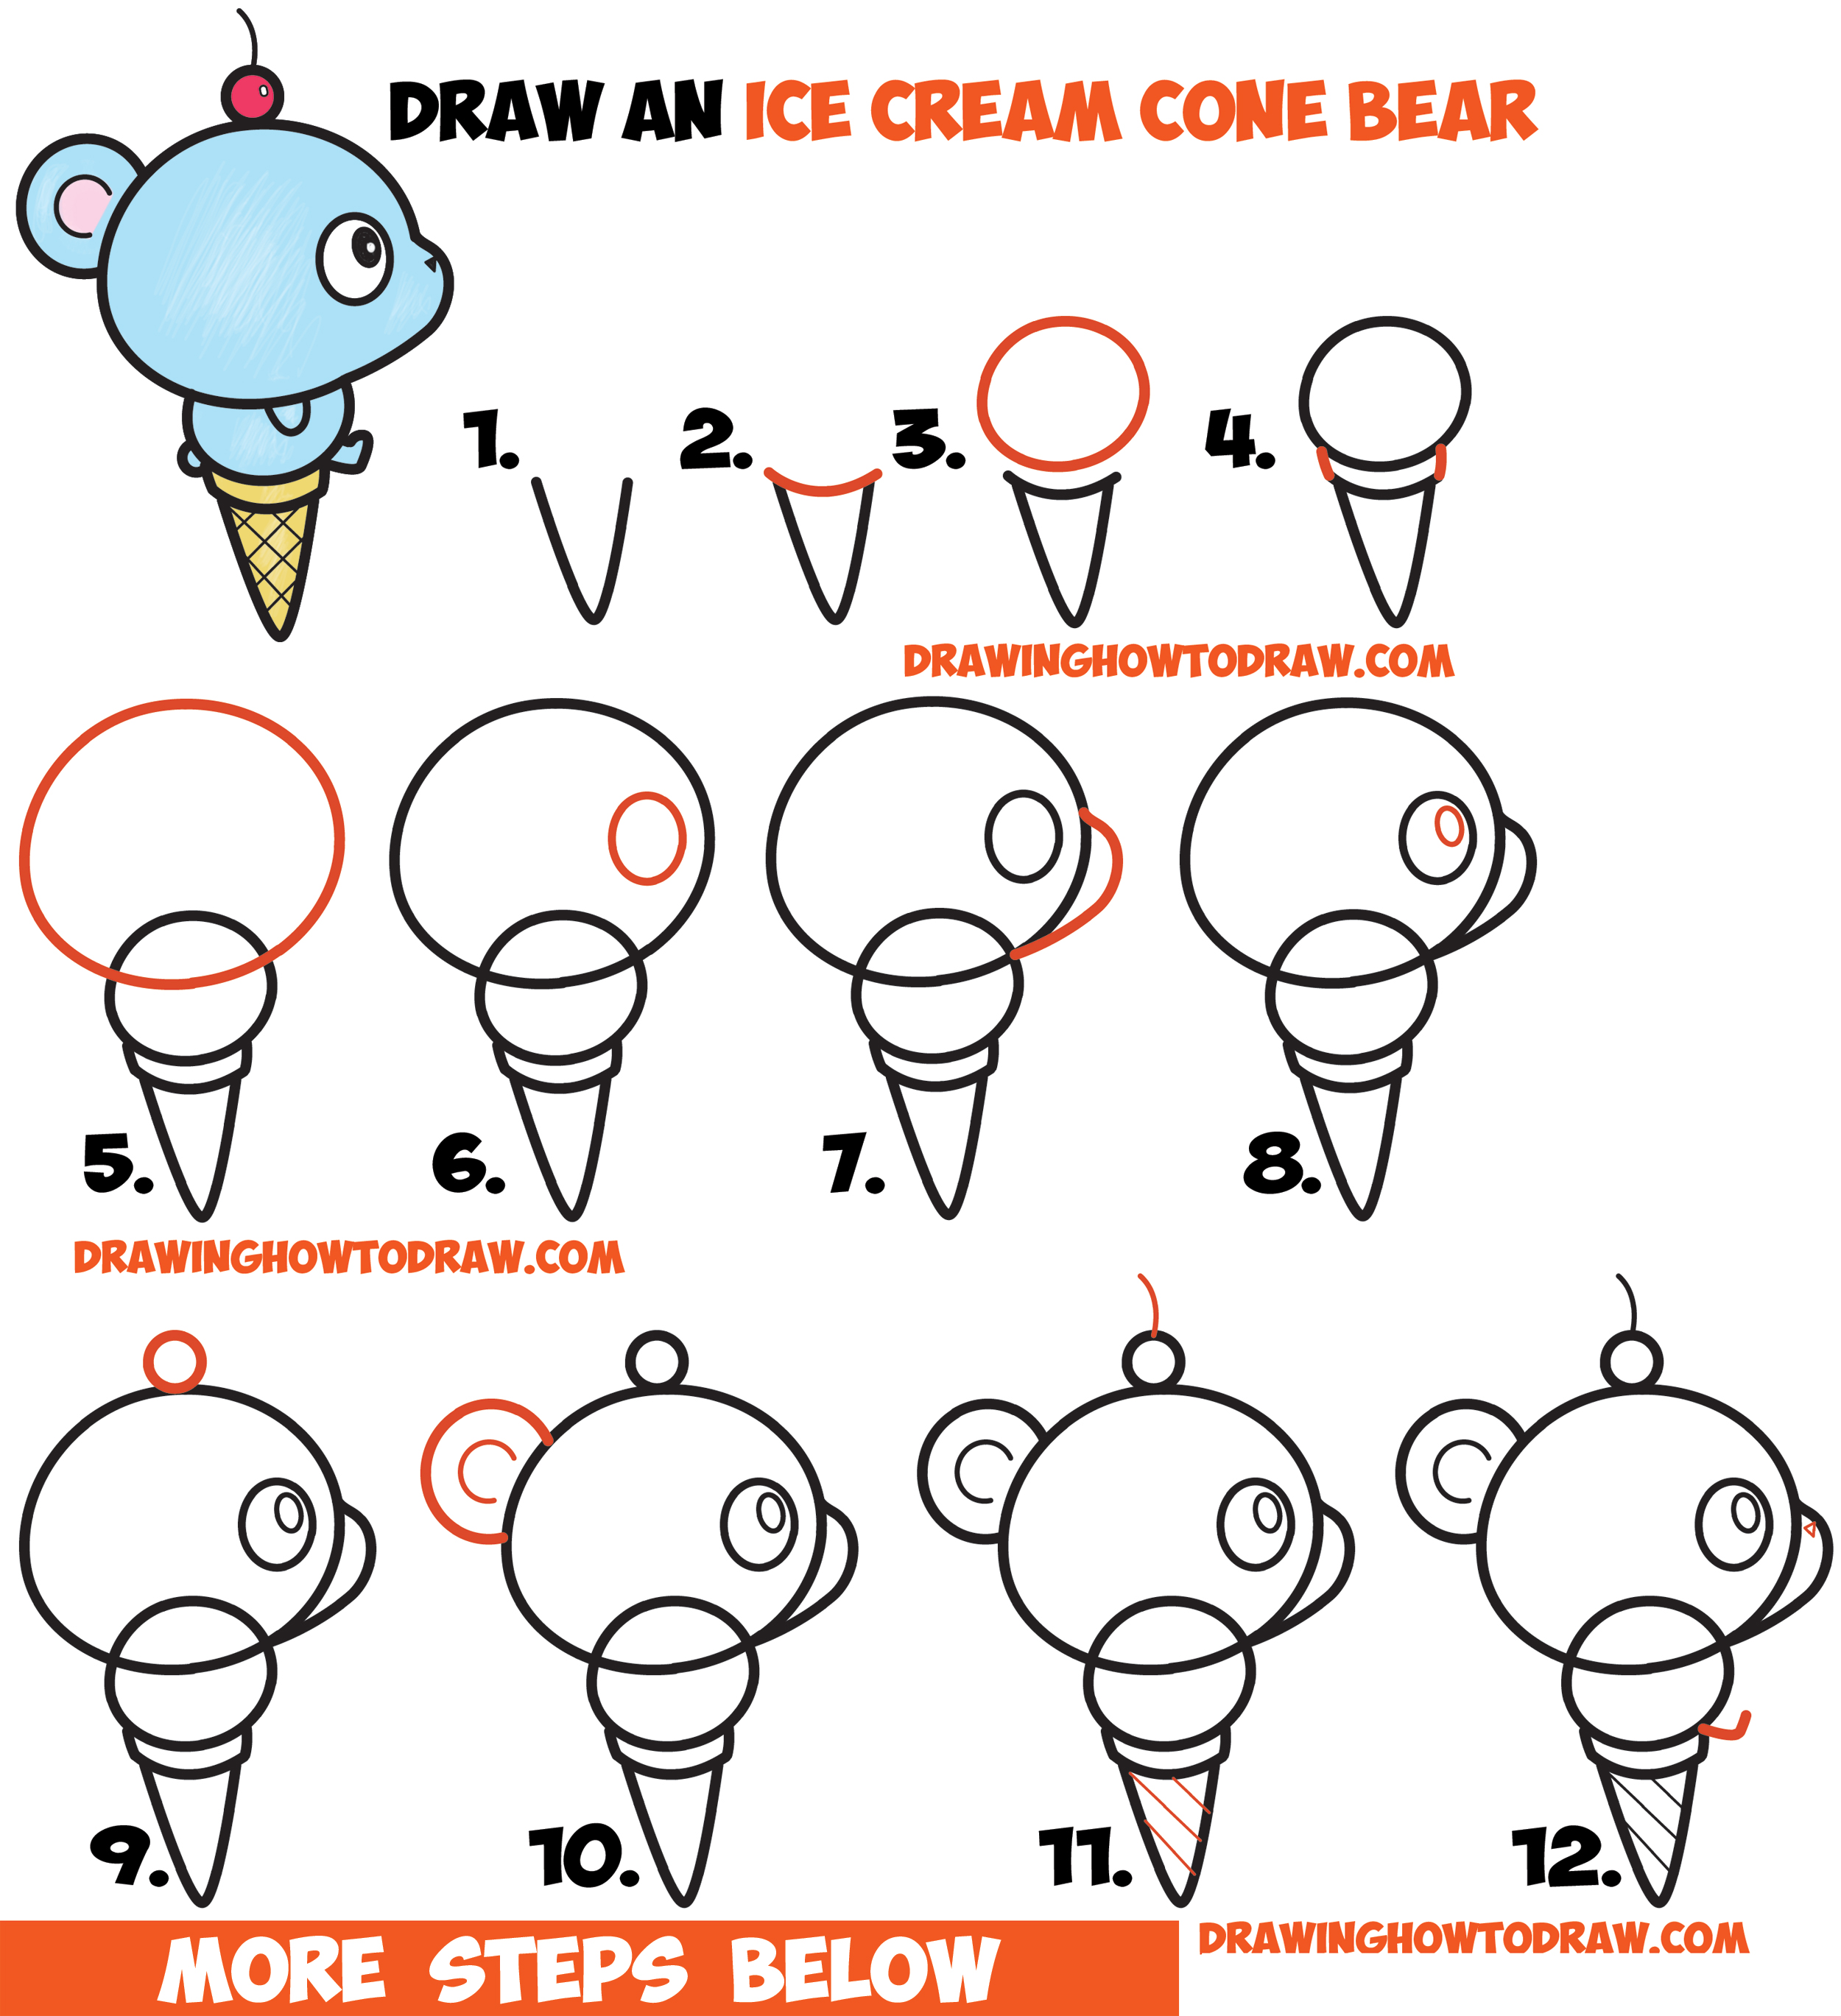 HOW TO DRAW ICE CREAM EASY STEP BY STEP - YouTube